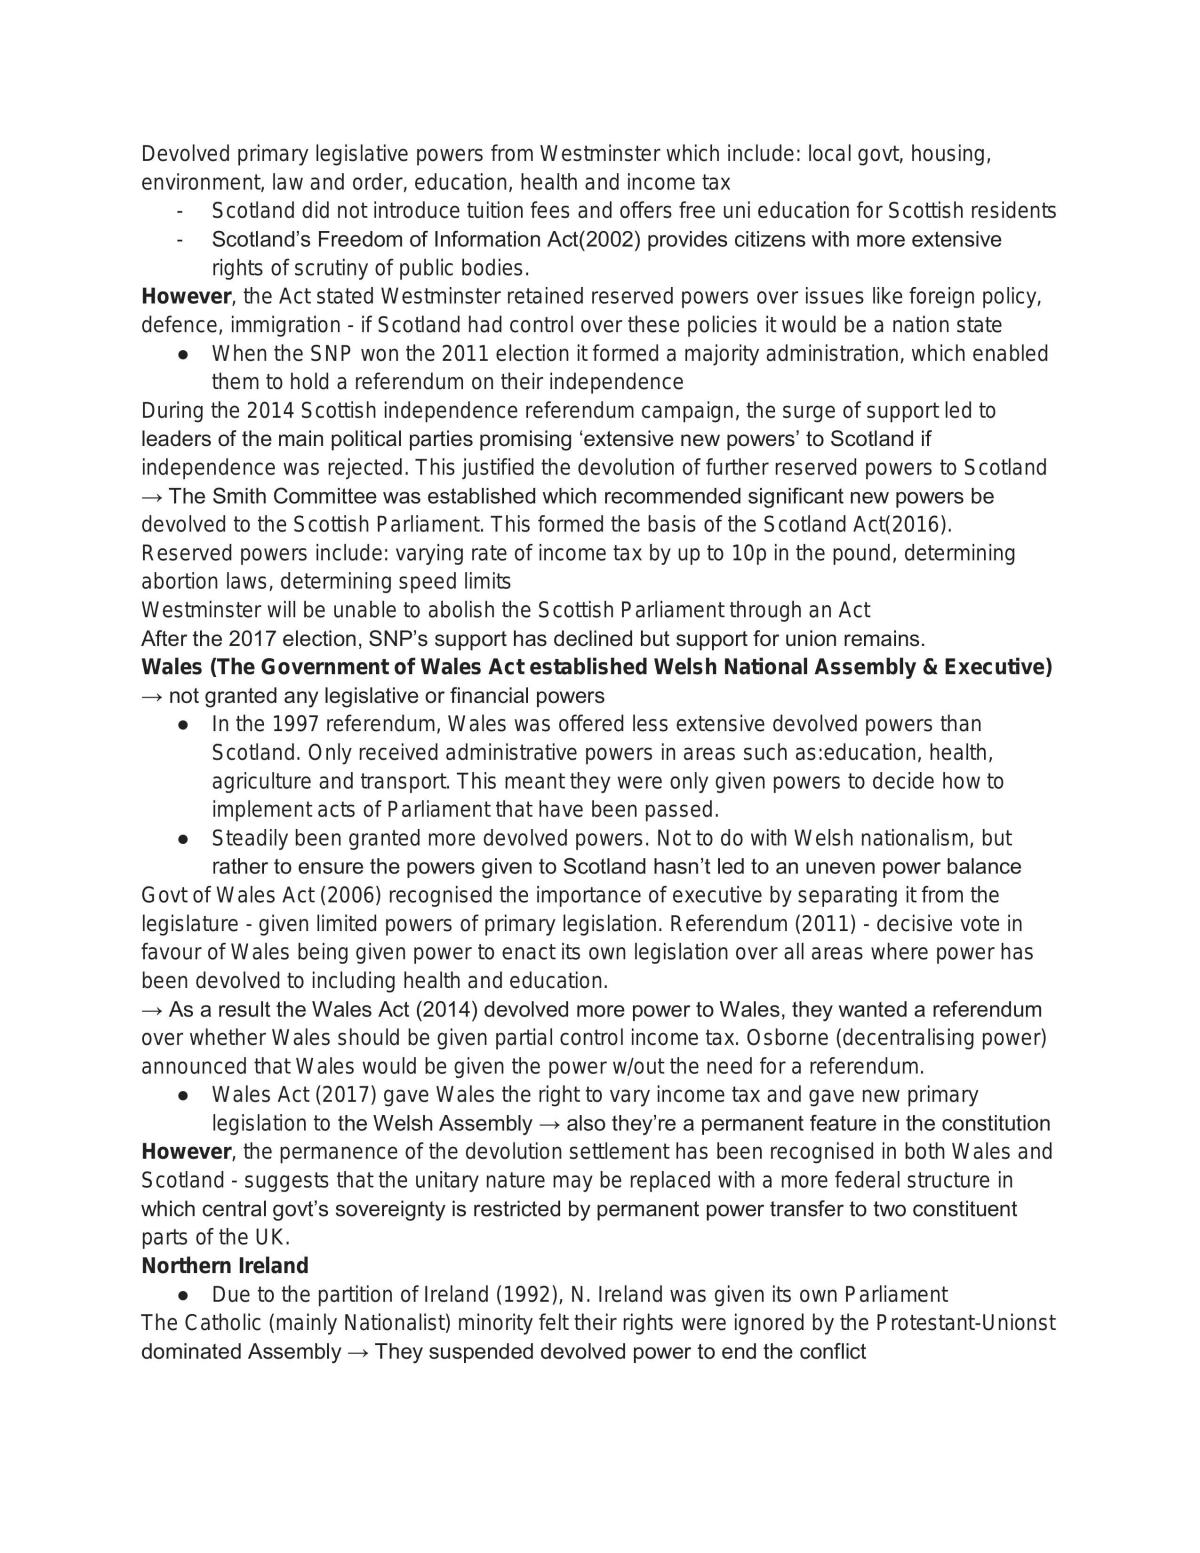 UK constitution - Page 4